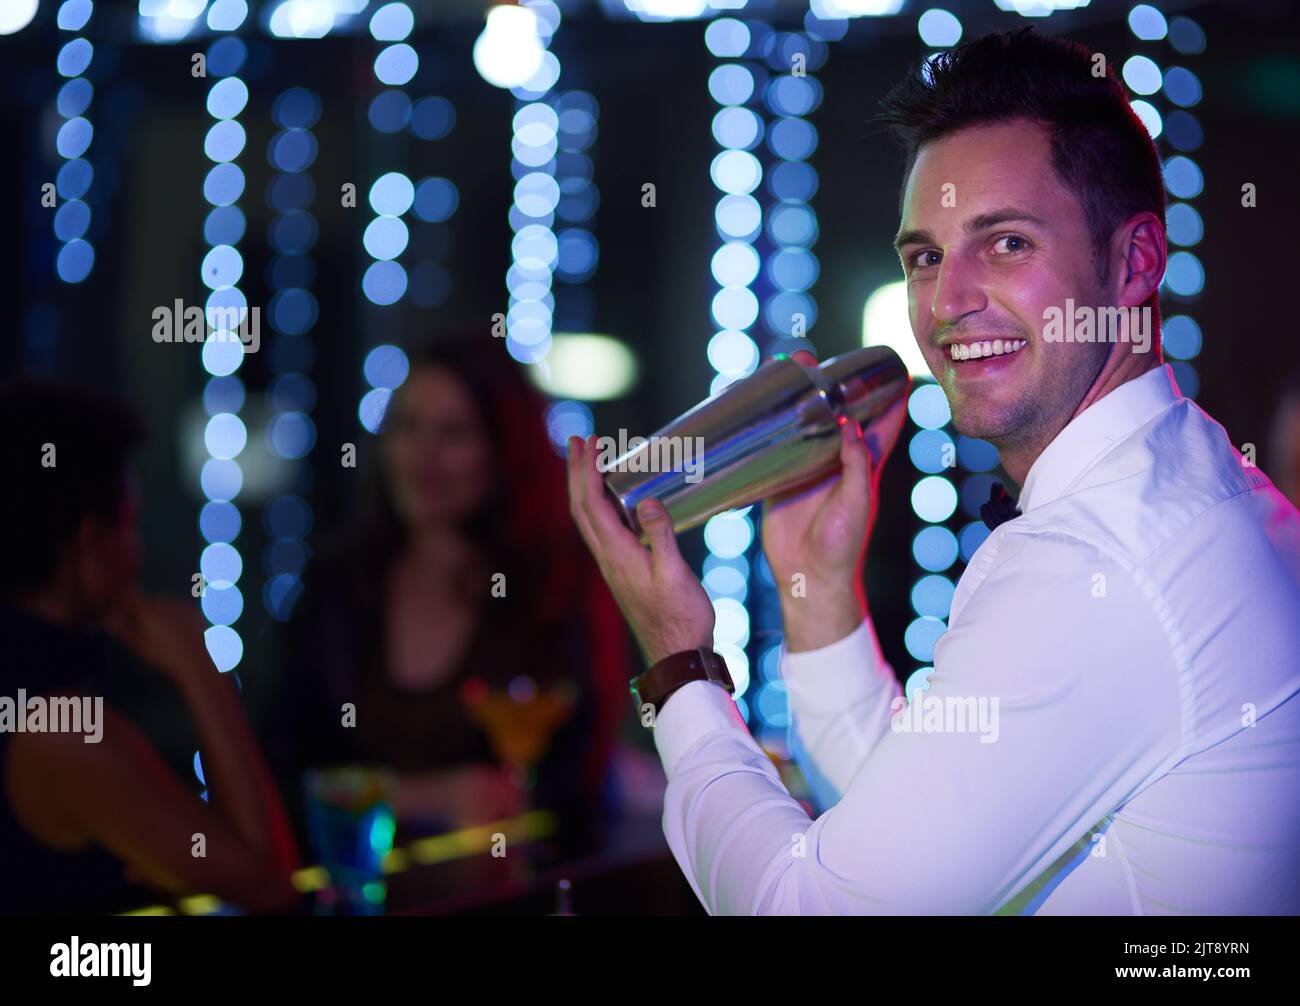 Having fun is all part of the job. Portrait of a smiling bartender mixing a drink behind the bar of a nightclub. Stock Photo